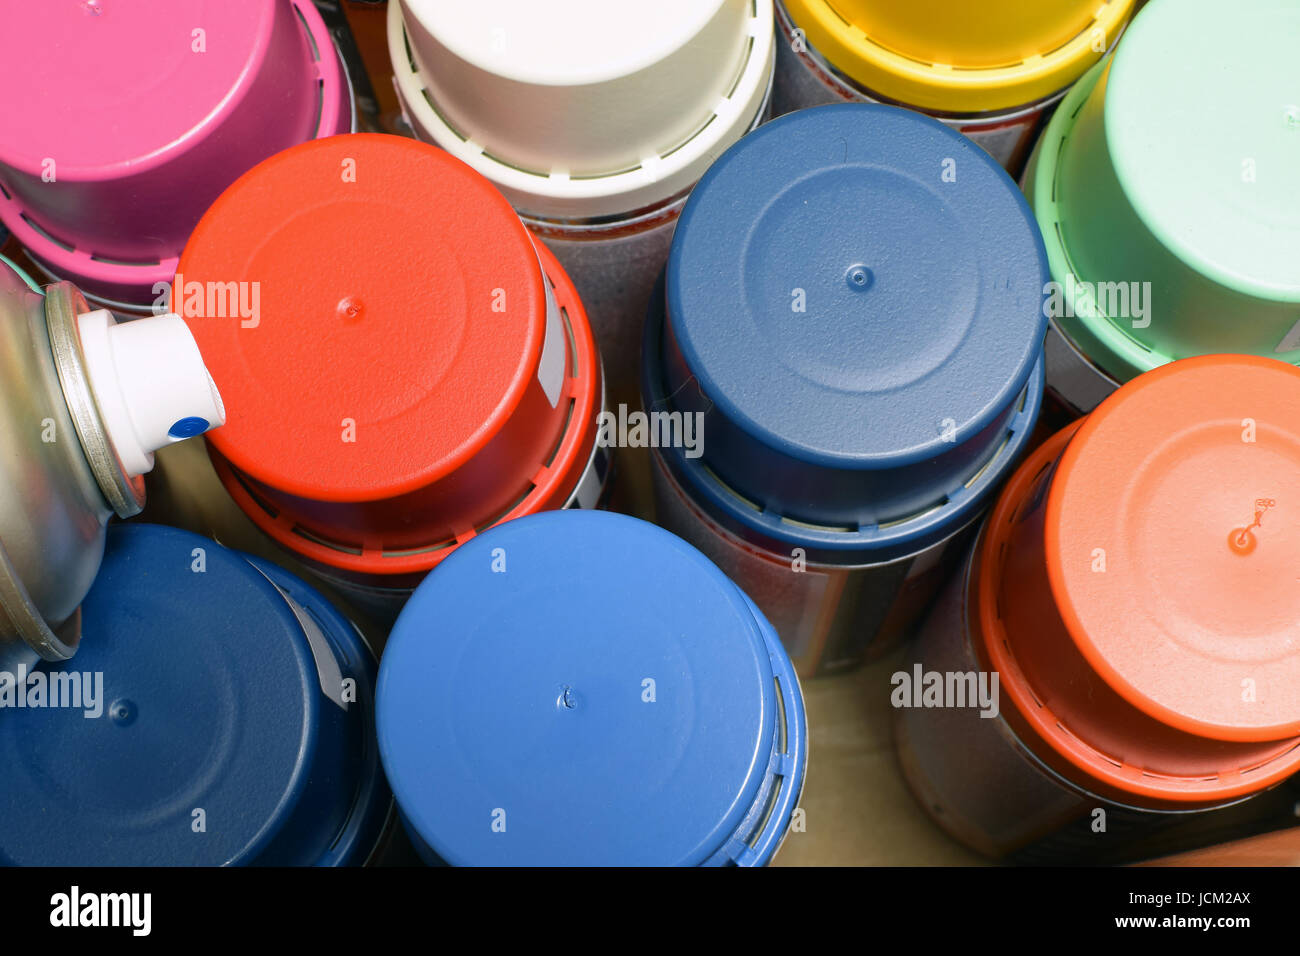 New spray paint cans. Top view Stock Photo